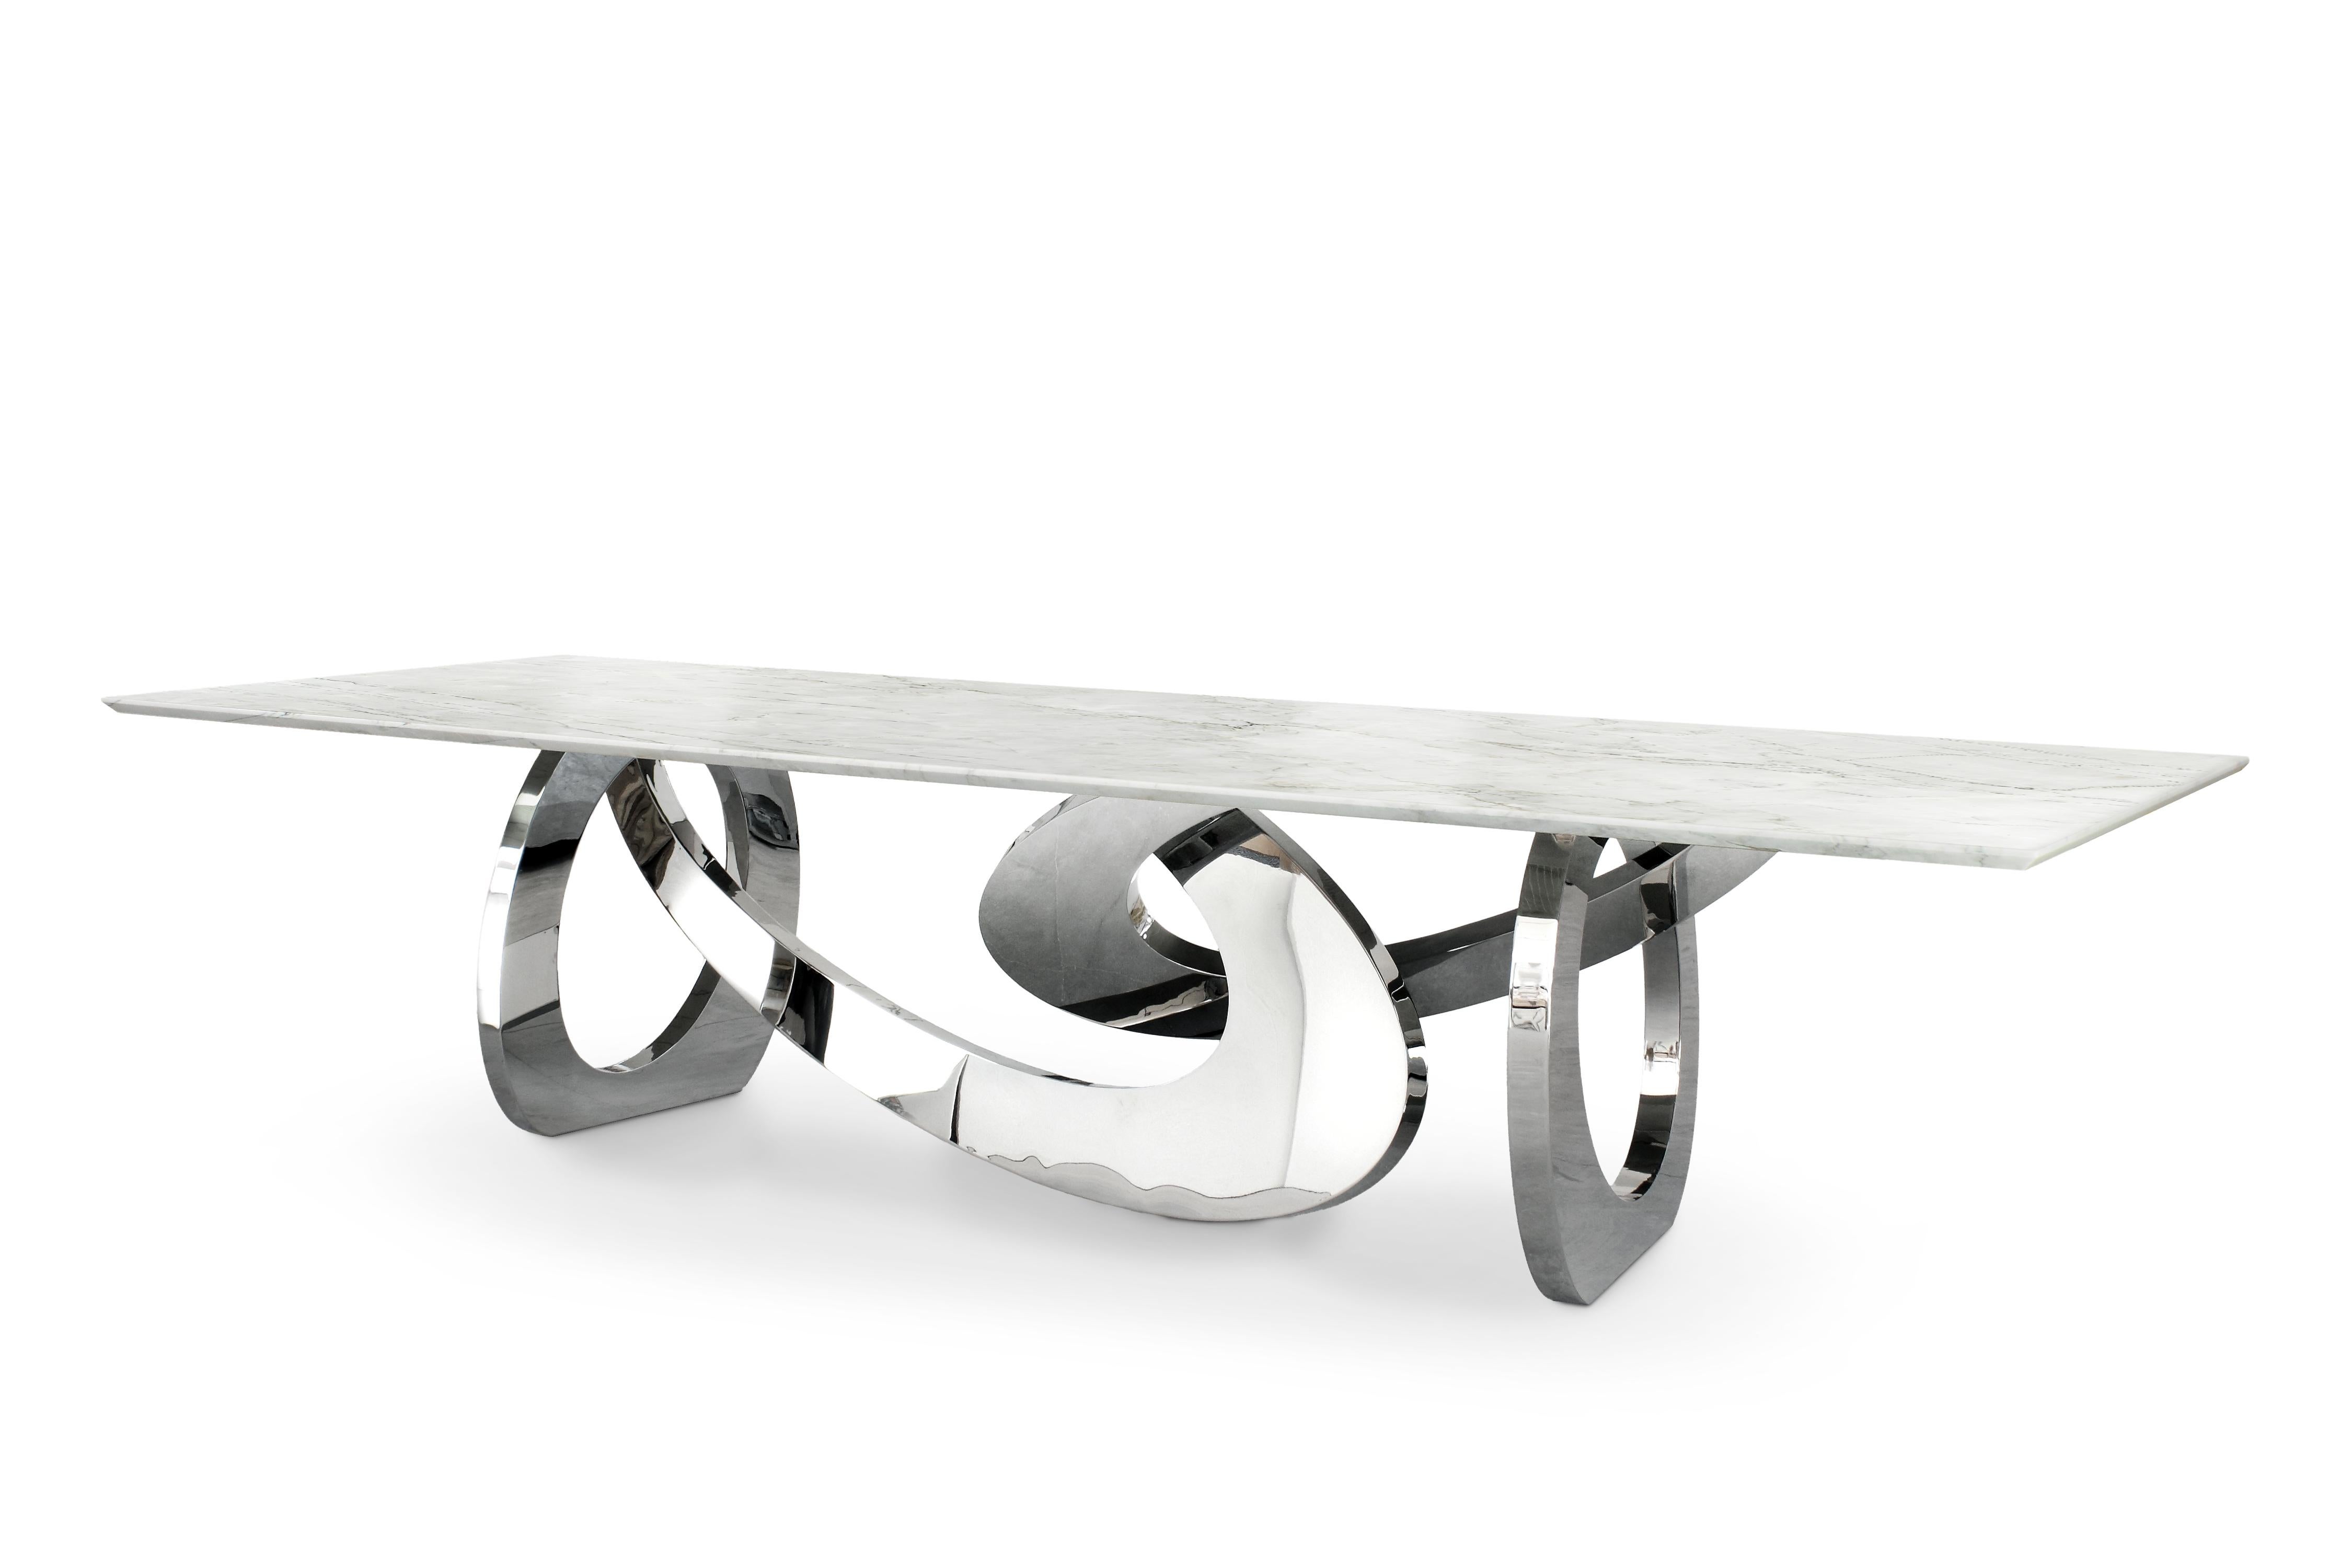 The table 'Bangles Stone' is an important sculptural dining table with structure in mirror polished stainless steel and top in Tahiti quartzite (Origin: Brazil). Every single bangle is welded and highly polished by hand. The mirror-like finishing of